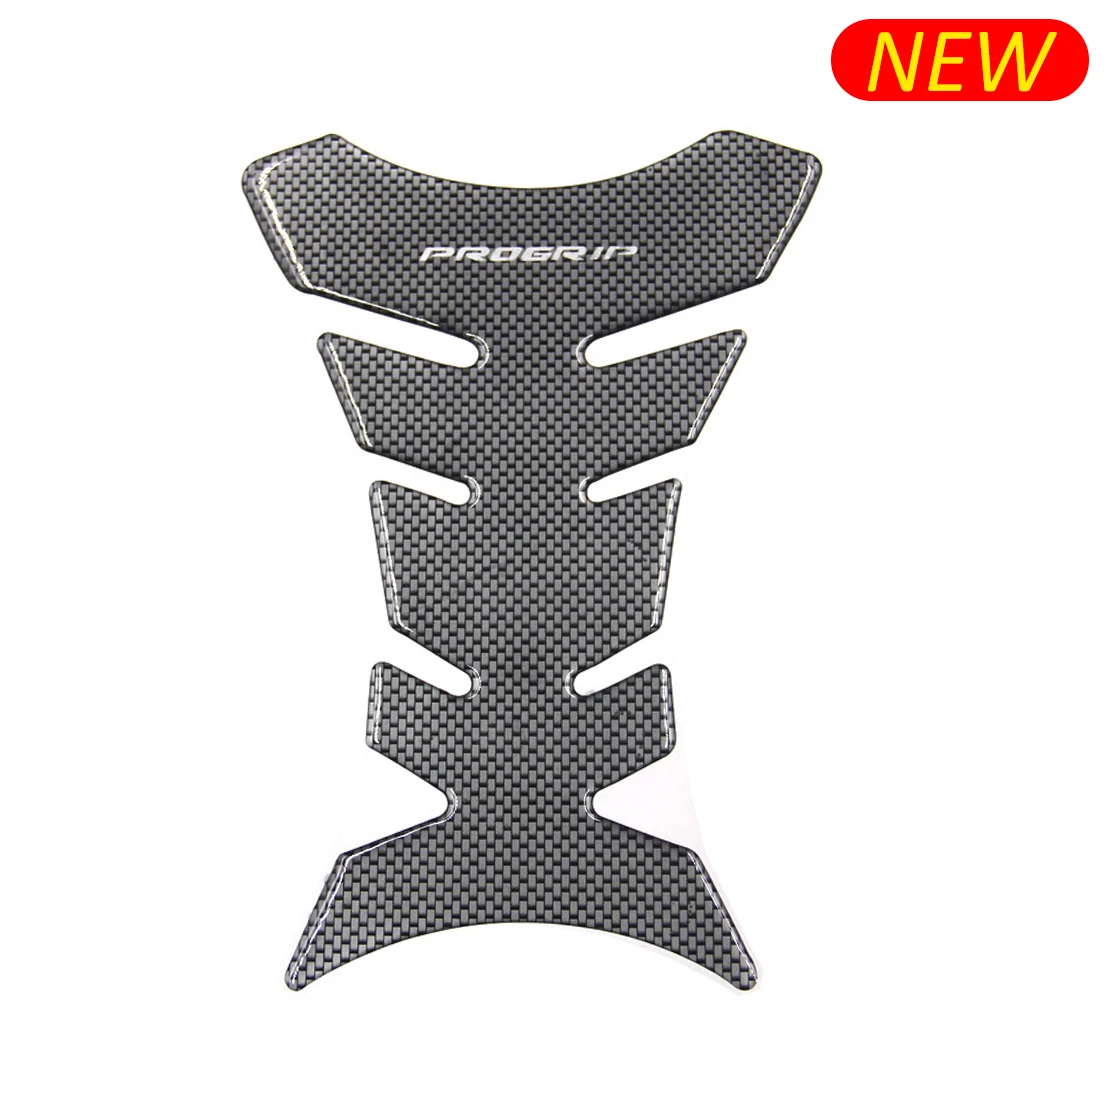 grey Rubber Tank Pad Protector Gas Oil Fuel Decal Sticker Motorcycle ATV Vehicles Fuel Tank Sticke